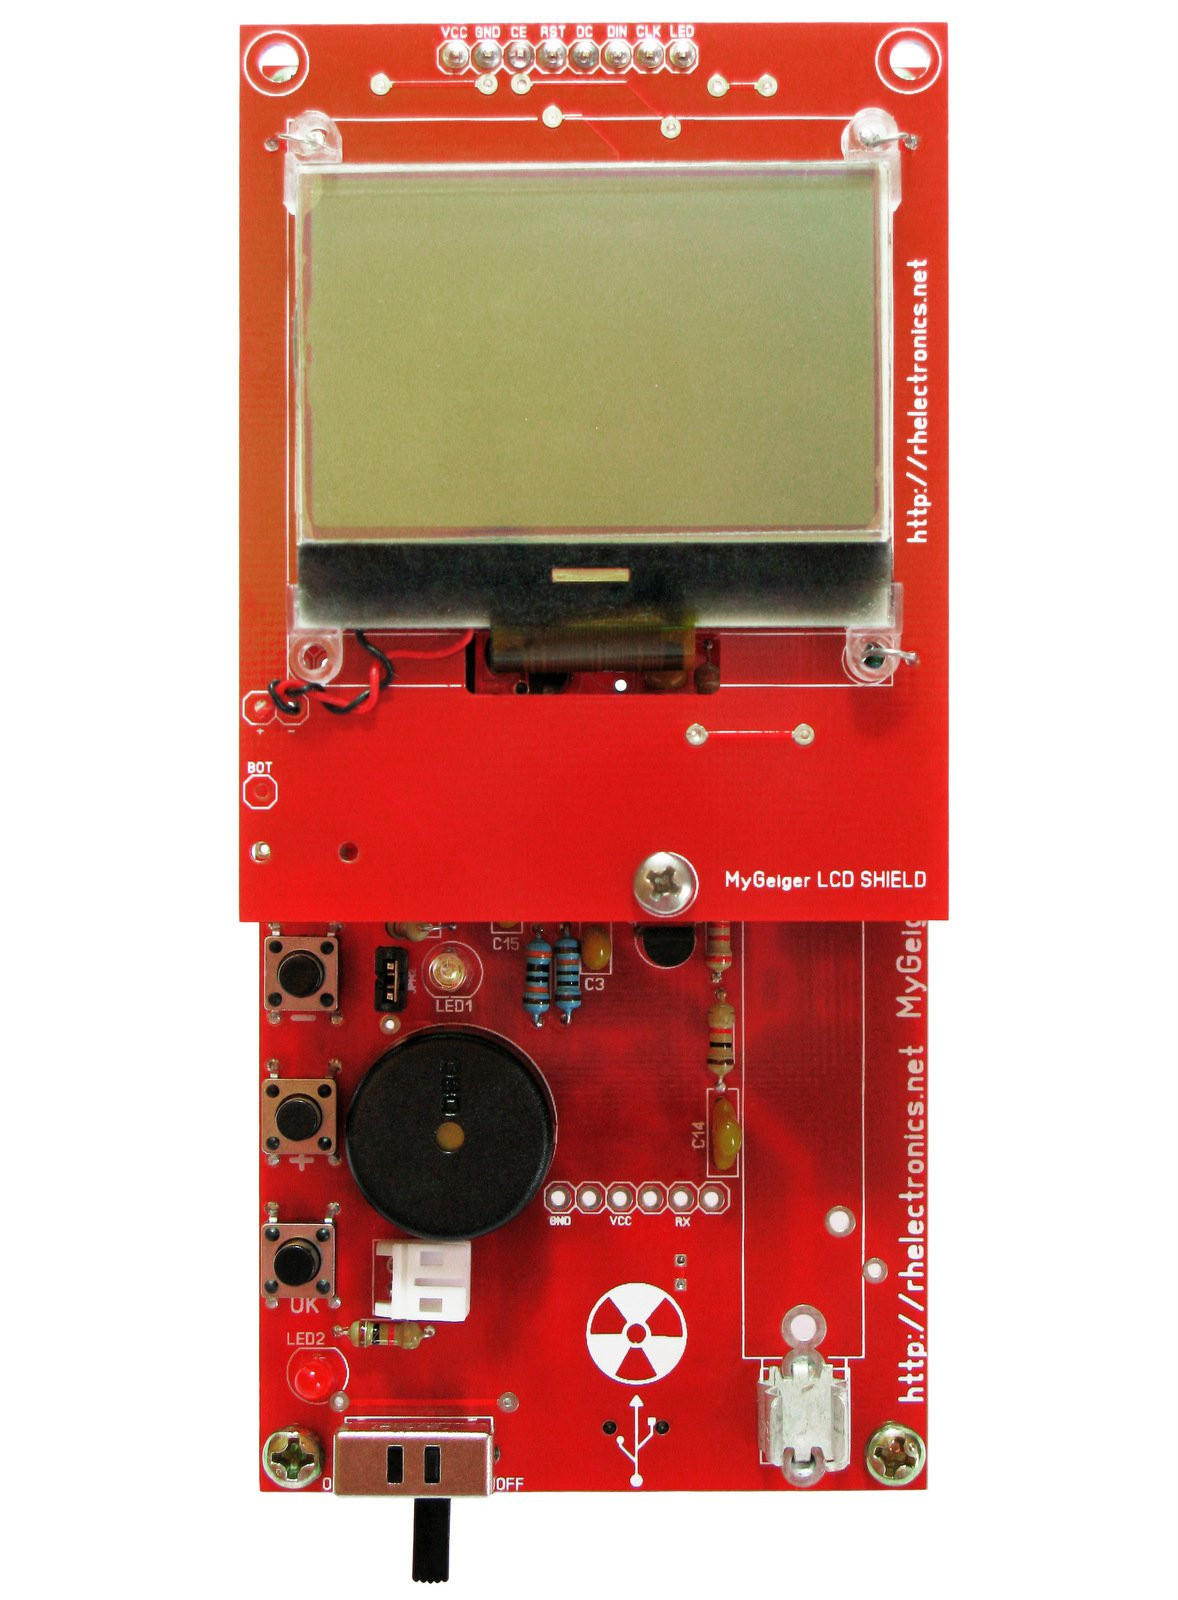 DIY Geiger Counter Kit
 MyGeiger ver 2 DIY Geiger Counter Kit with USB LCD from